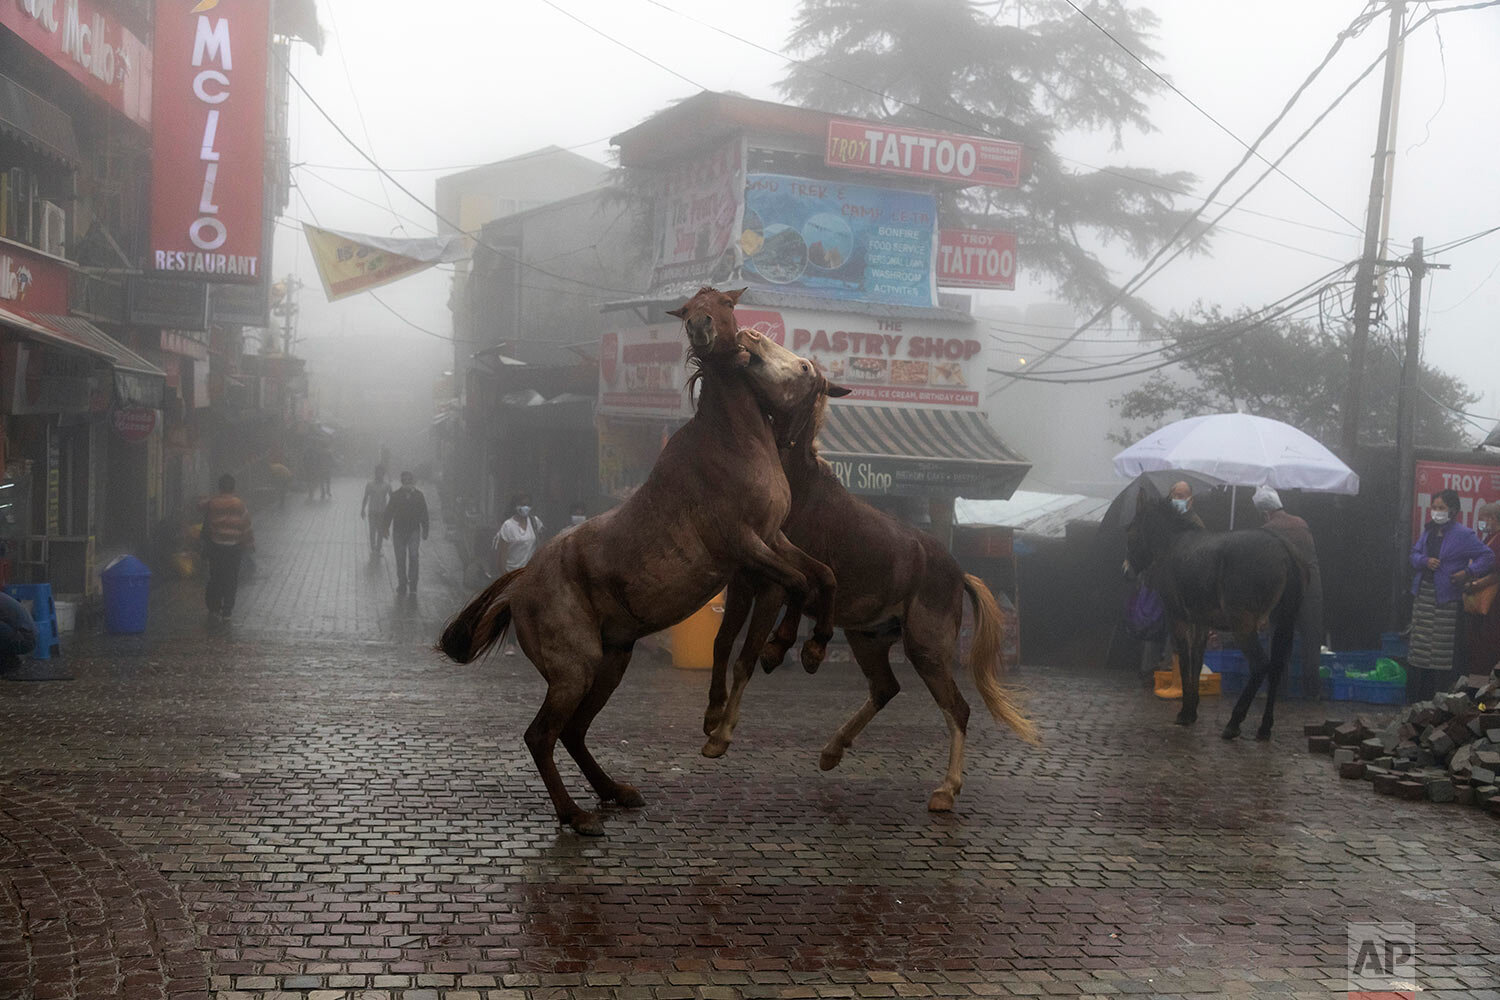  Two packhorses playfully jostel each other in the rain-soaked main town square in Dharmsala, India, Friday, Sept. 17, 2021. (AP Photo/Ashwini Bhatia) 